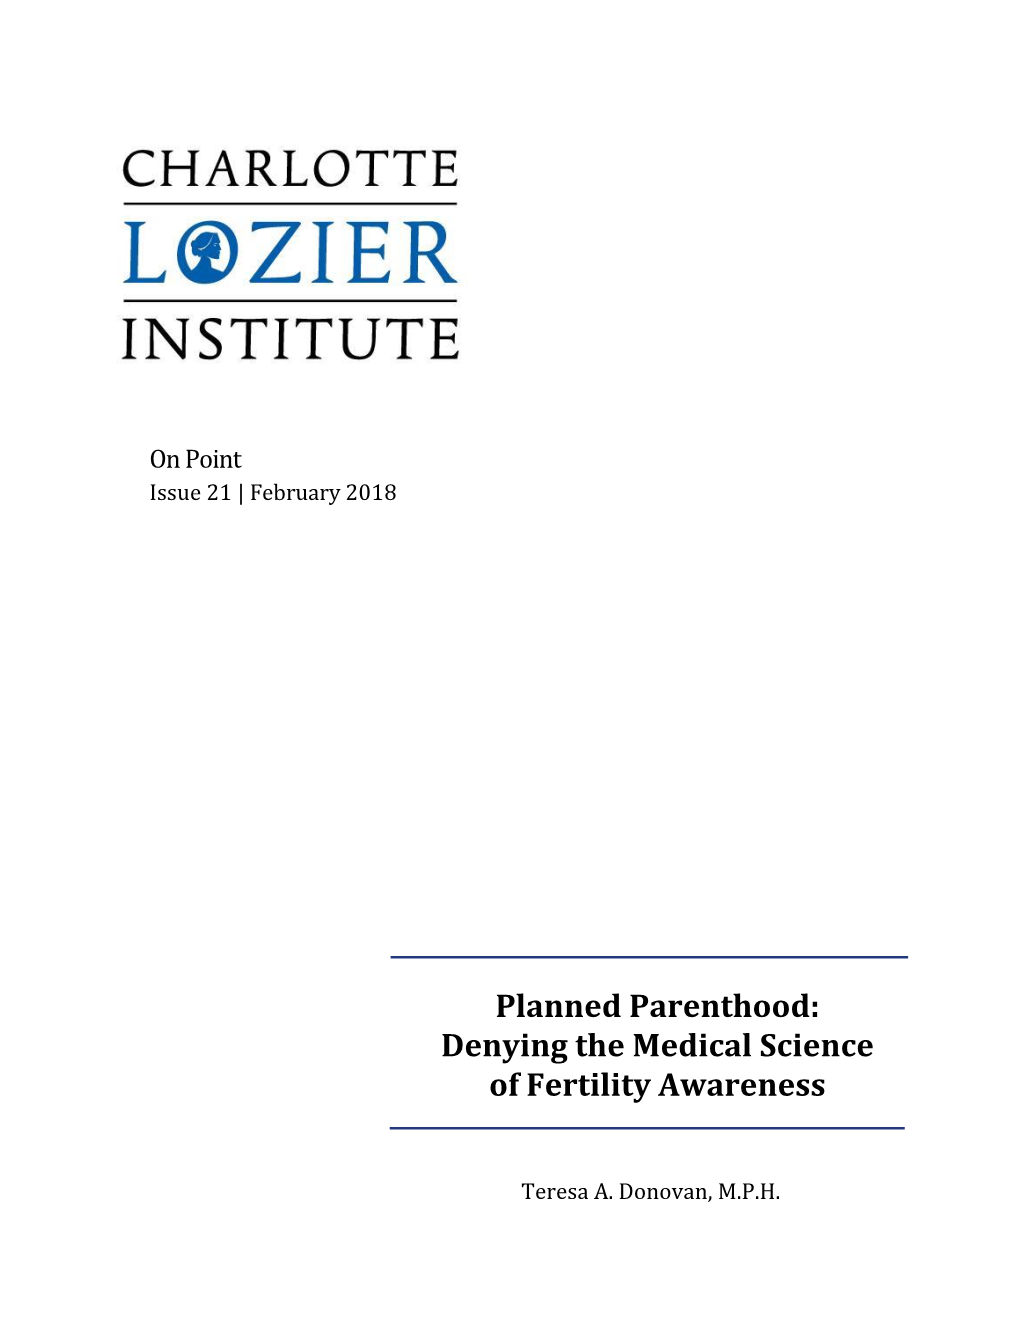 Planned Parenthood: Denying the Medical Science of Fertility Awareness